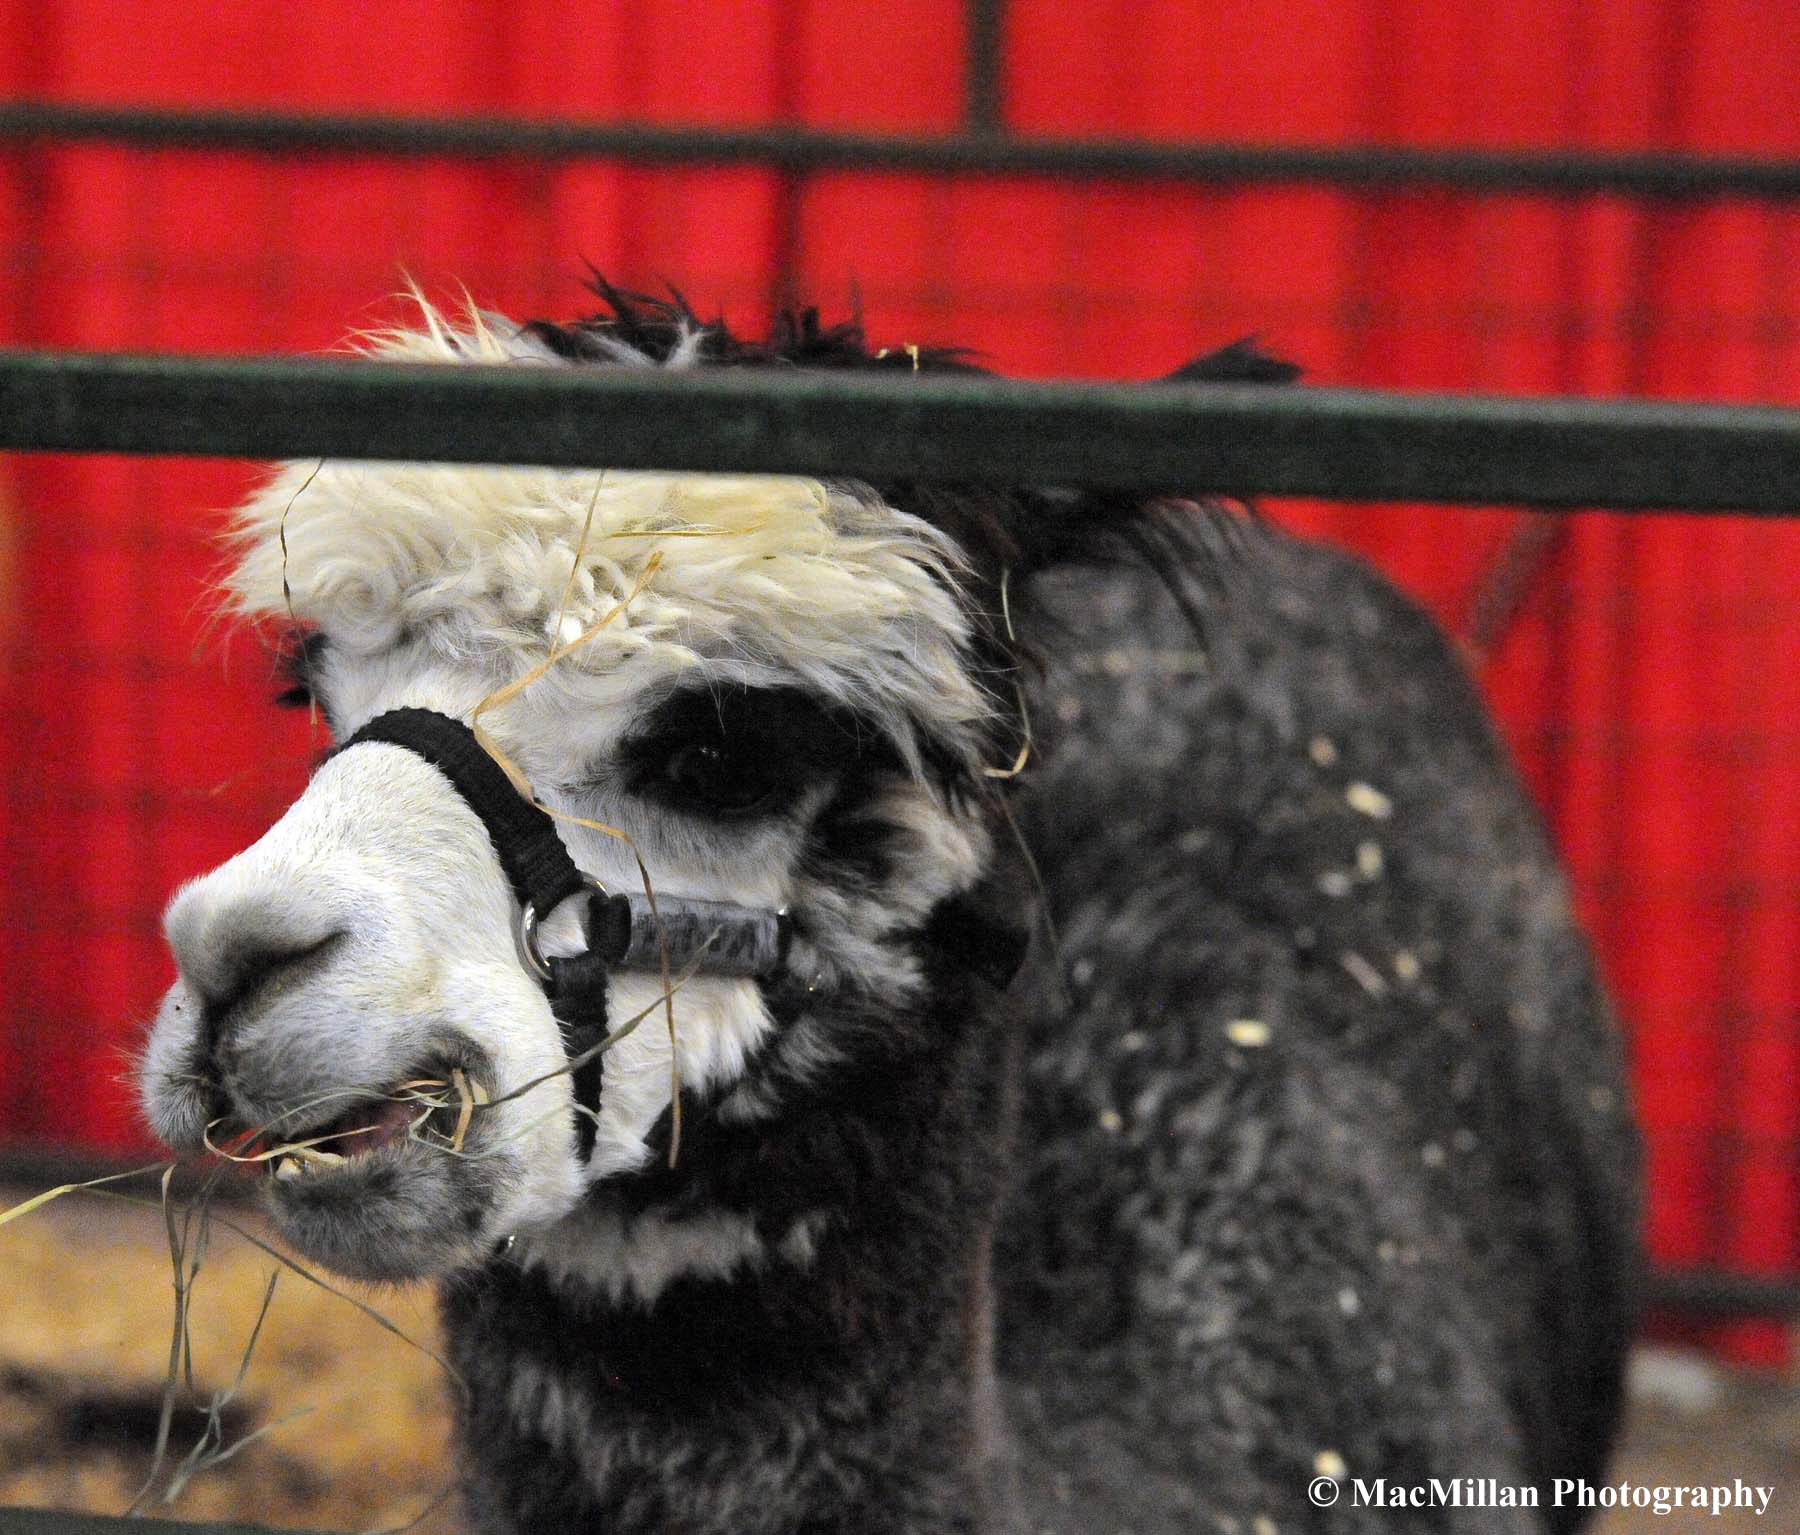 Photo 38 – This cute and friendly alpaca was part of an educational exhibit at the 2015 Royal Winter Fair. There was also wool spun from alpaca mohair and alpaca mohair clothing for sale at the Royal.Photo by Sarah Miller/MacMillan Photography